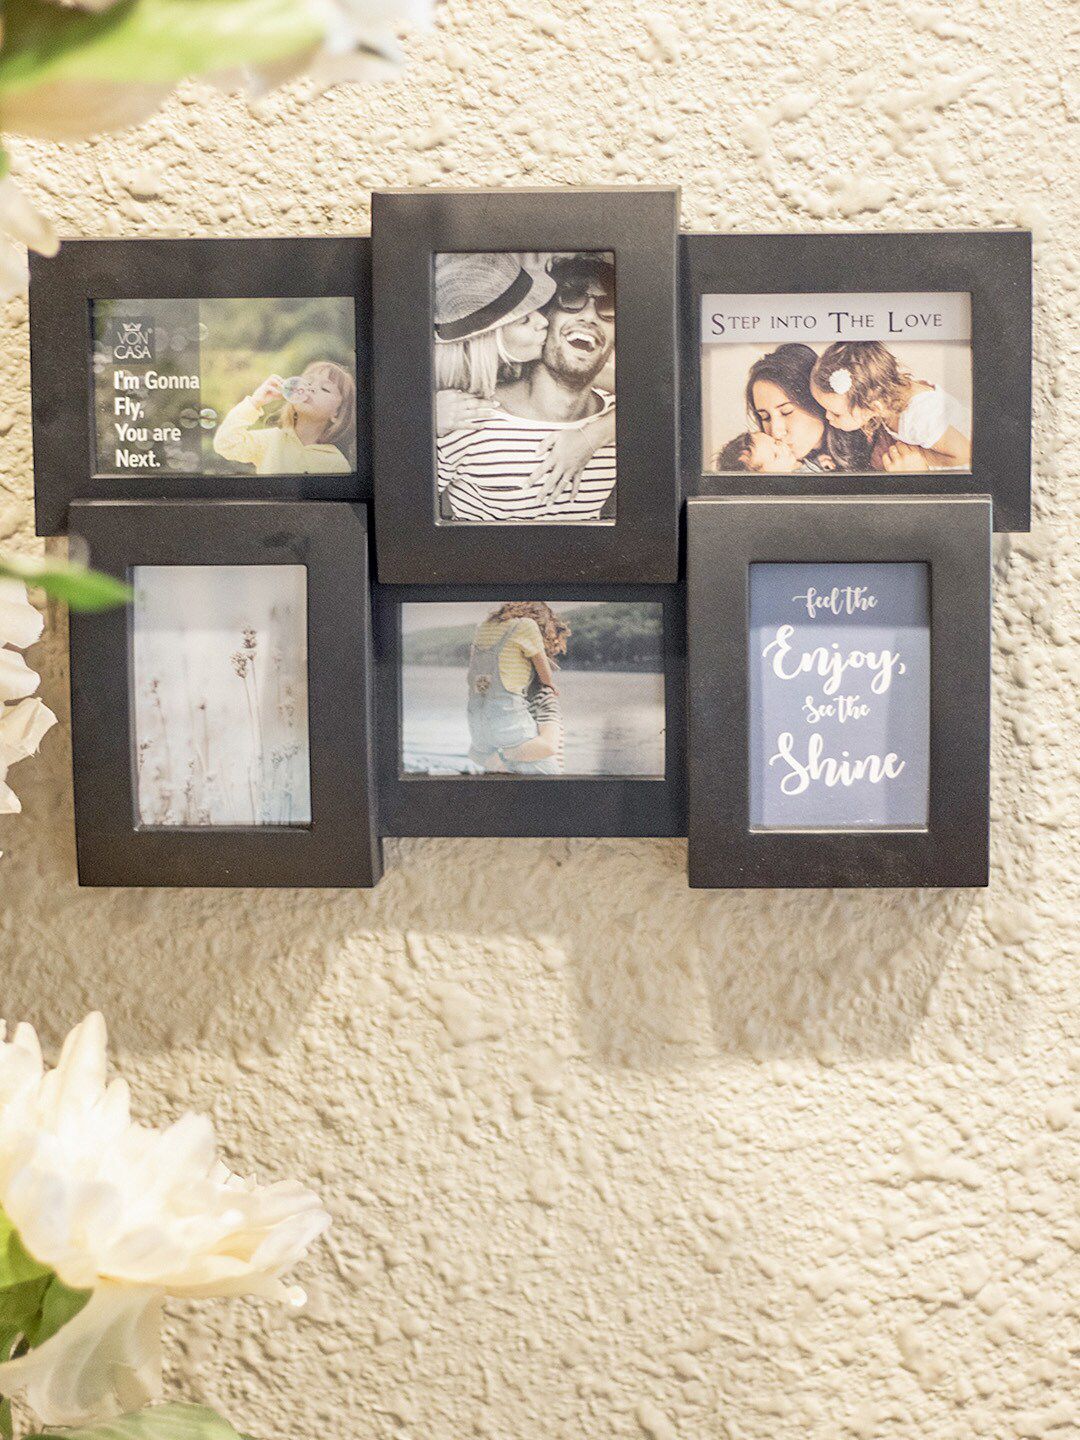 MARKET99 Black Solid Wall Photo Frame Price in India